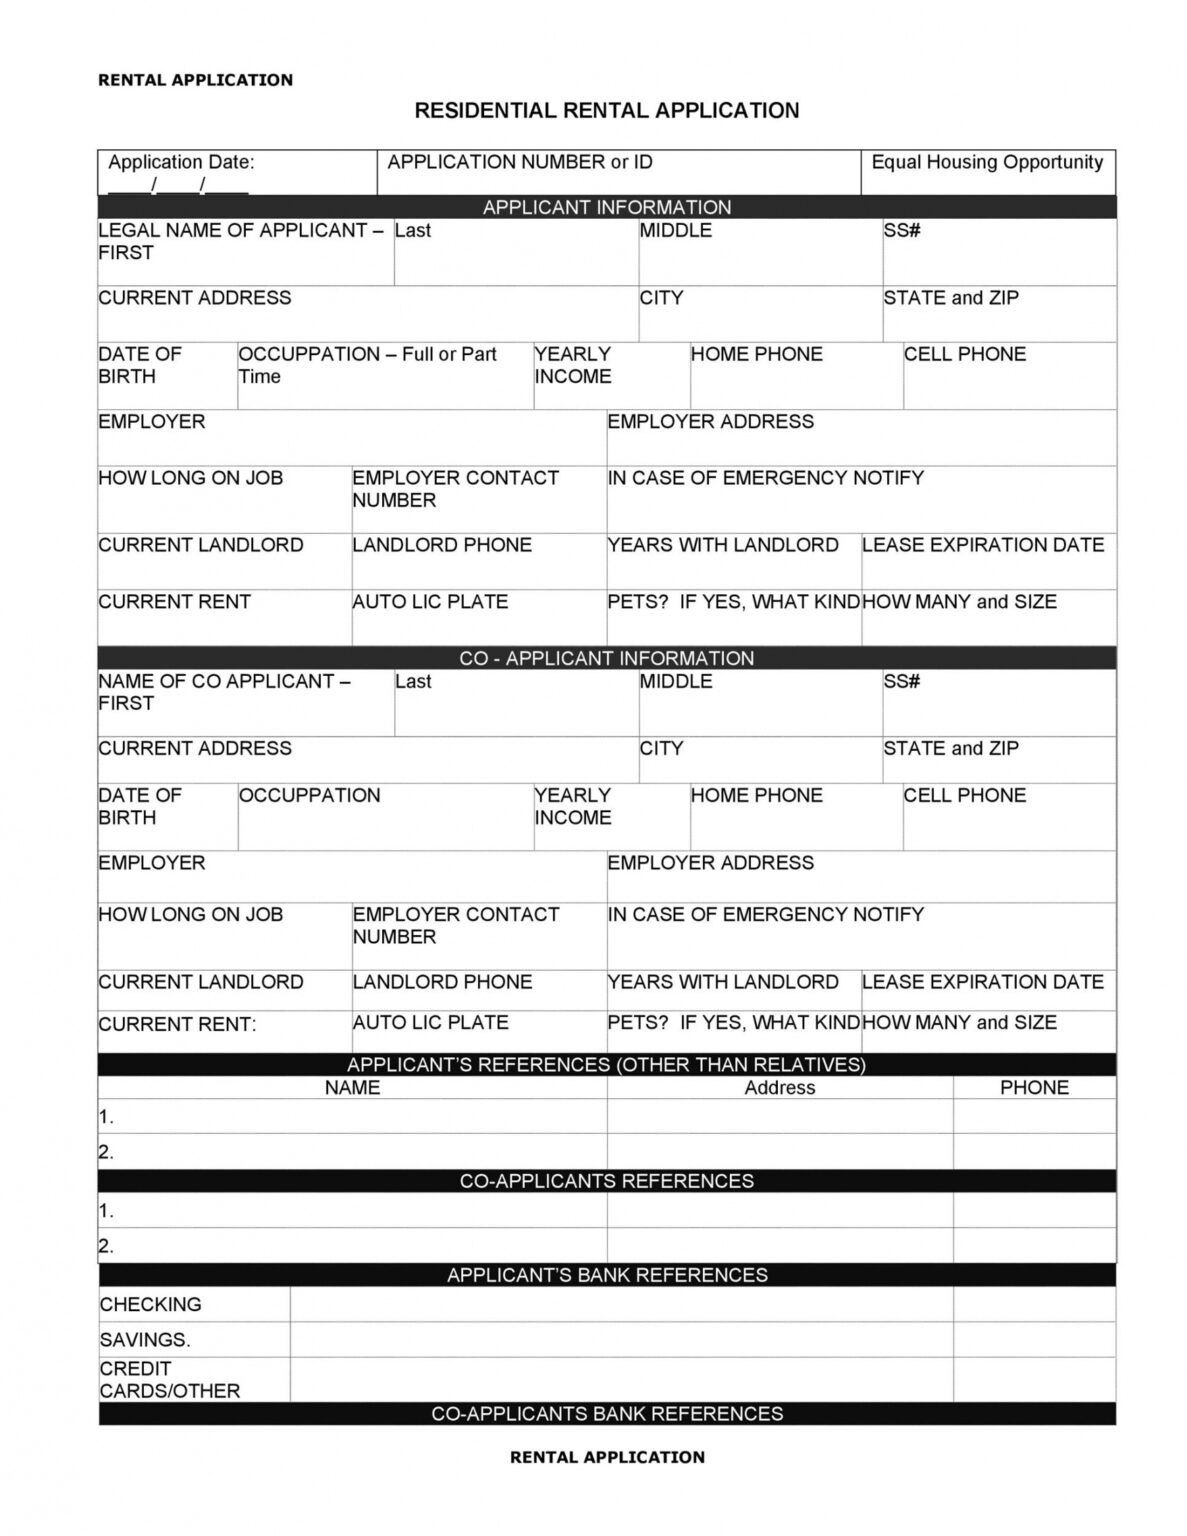 download-free-blank-rental-application-form-printable-lease-agreement